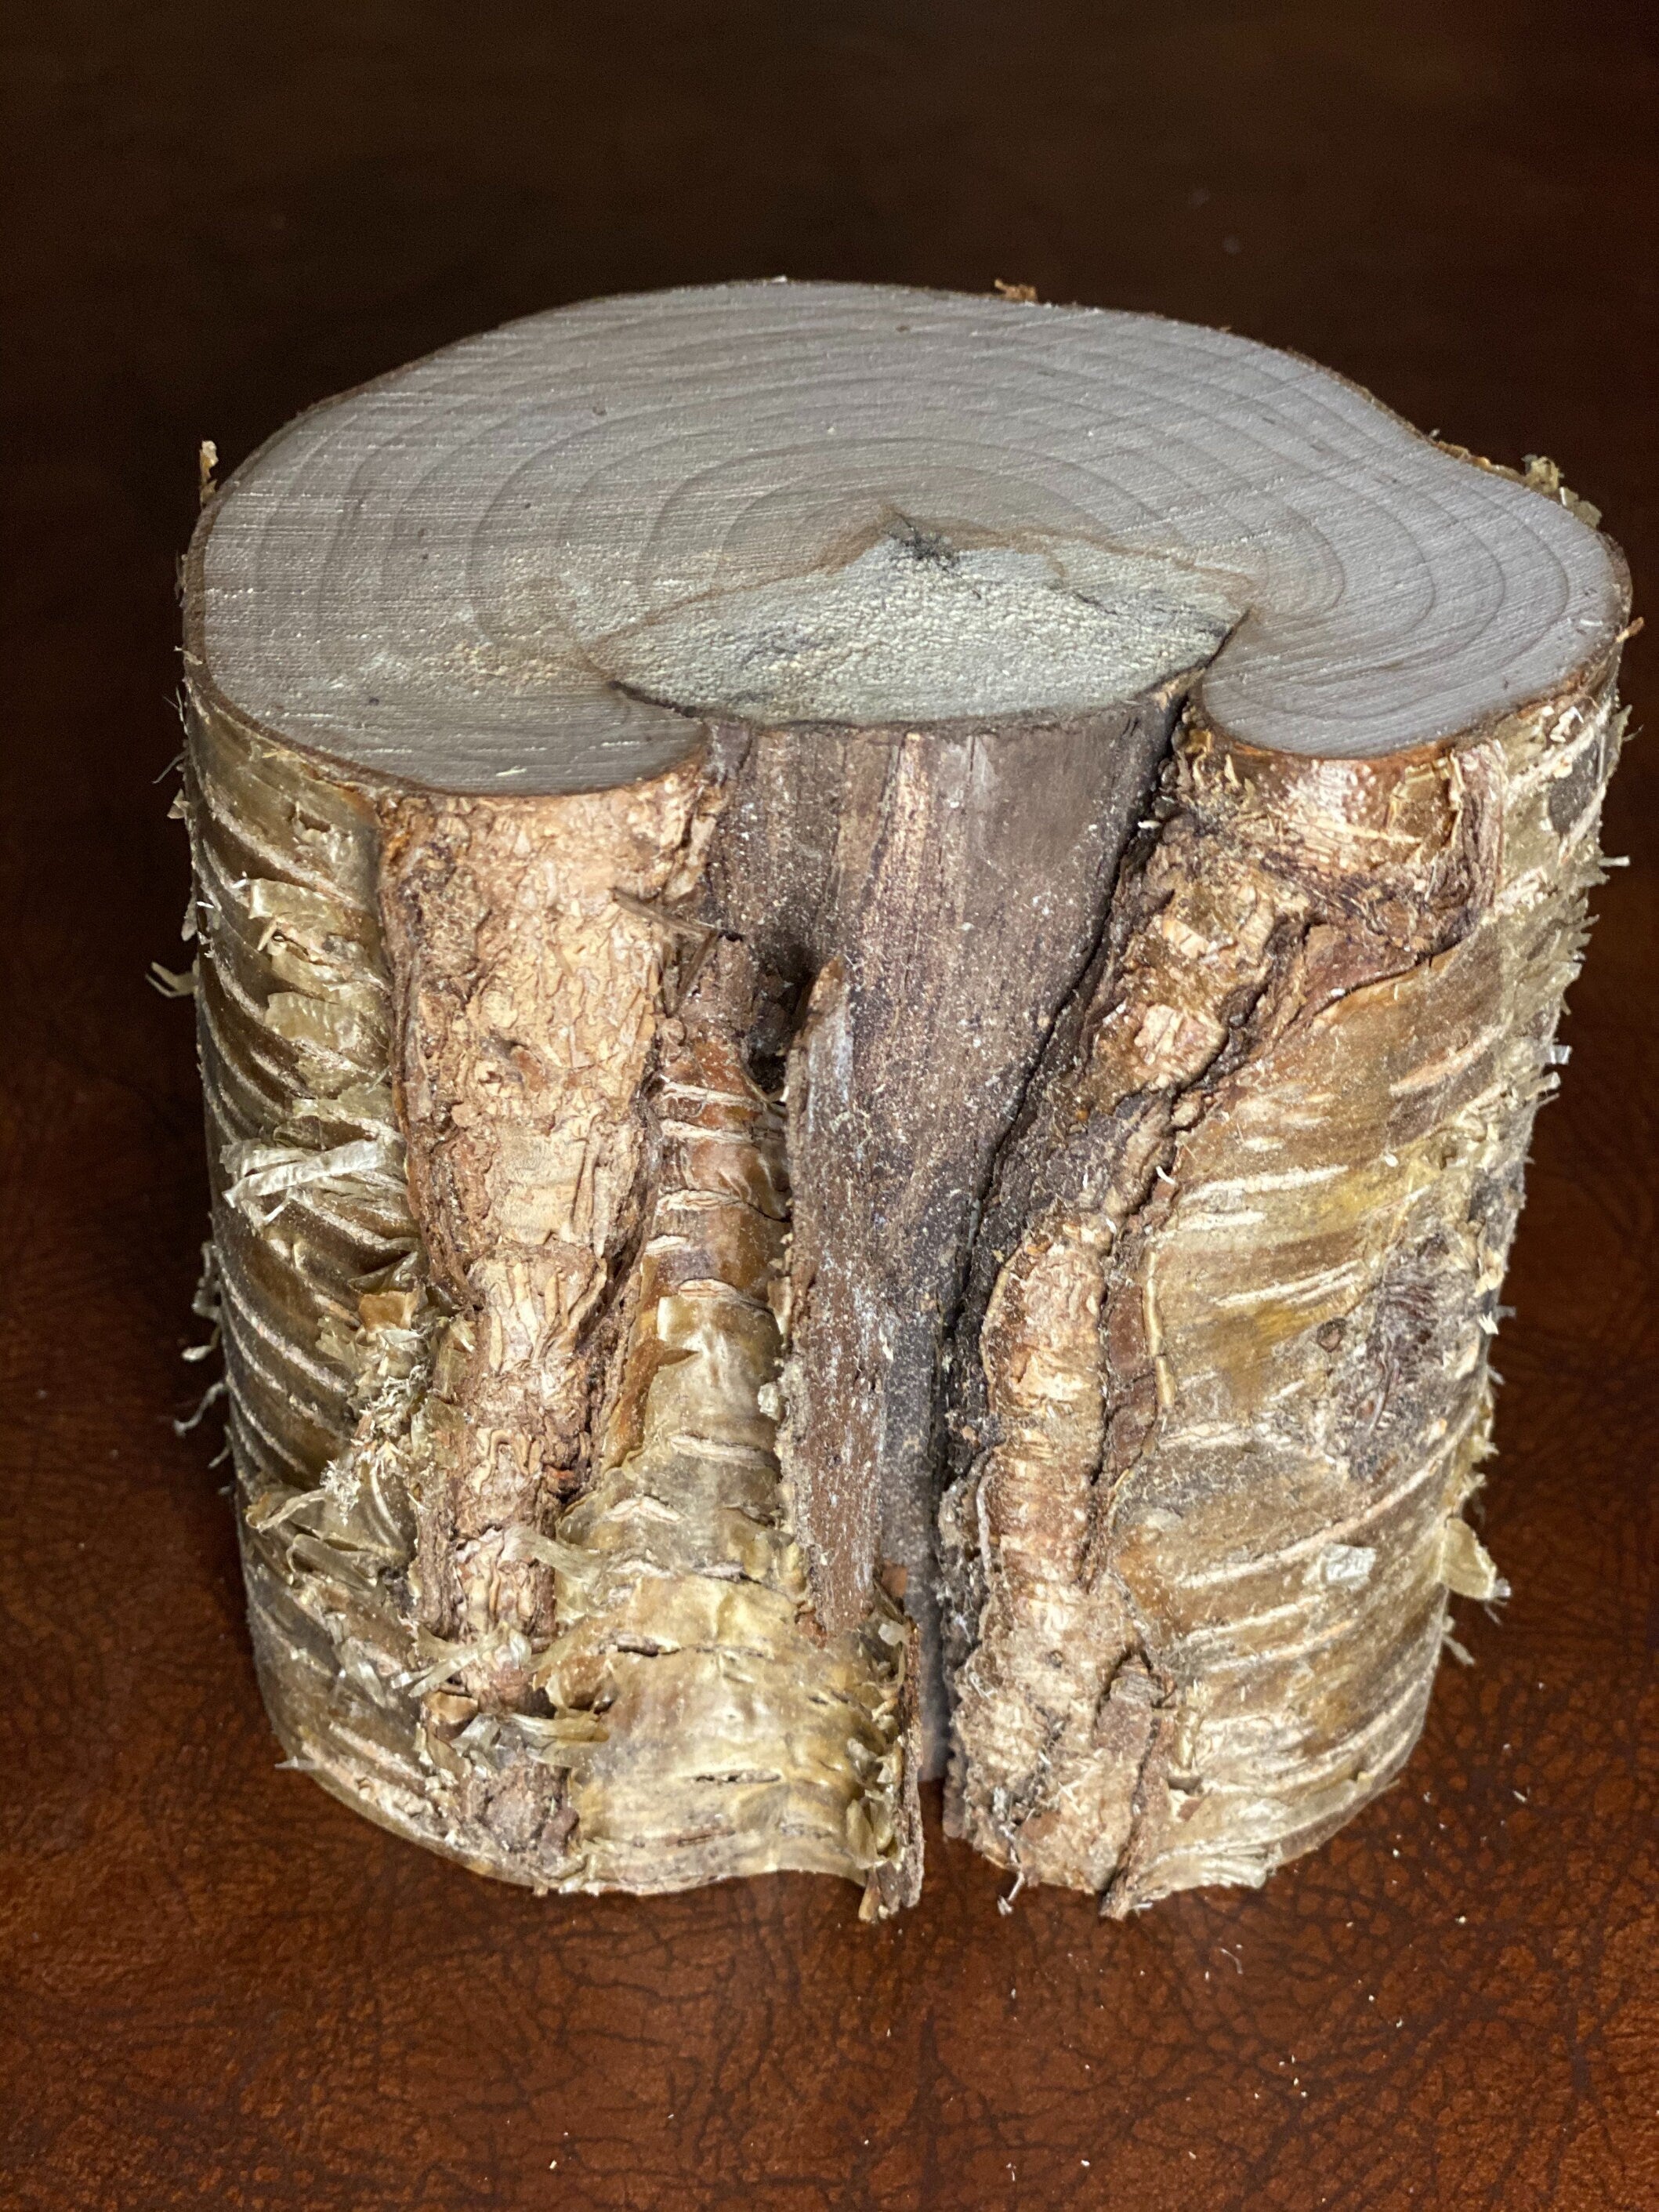 Yellow Birch Log, Golden Brown, Approximately 5 Inches Long by 5 Inches Wide and 4 Inches High